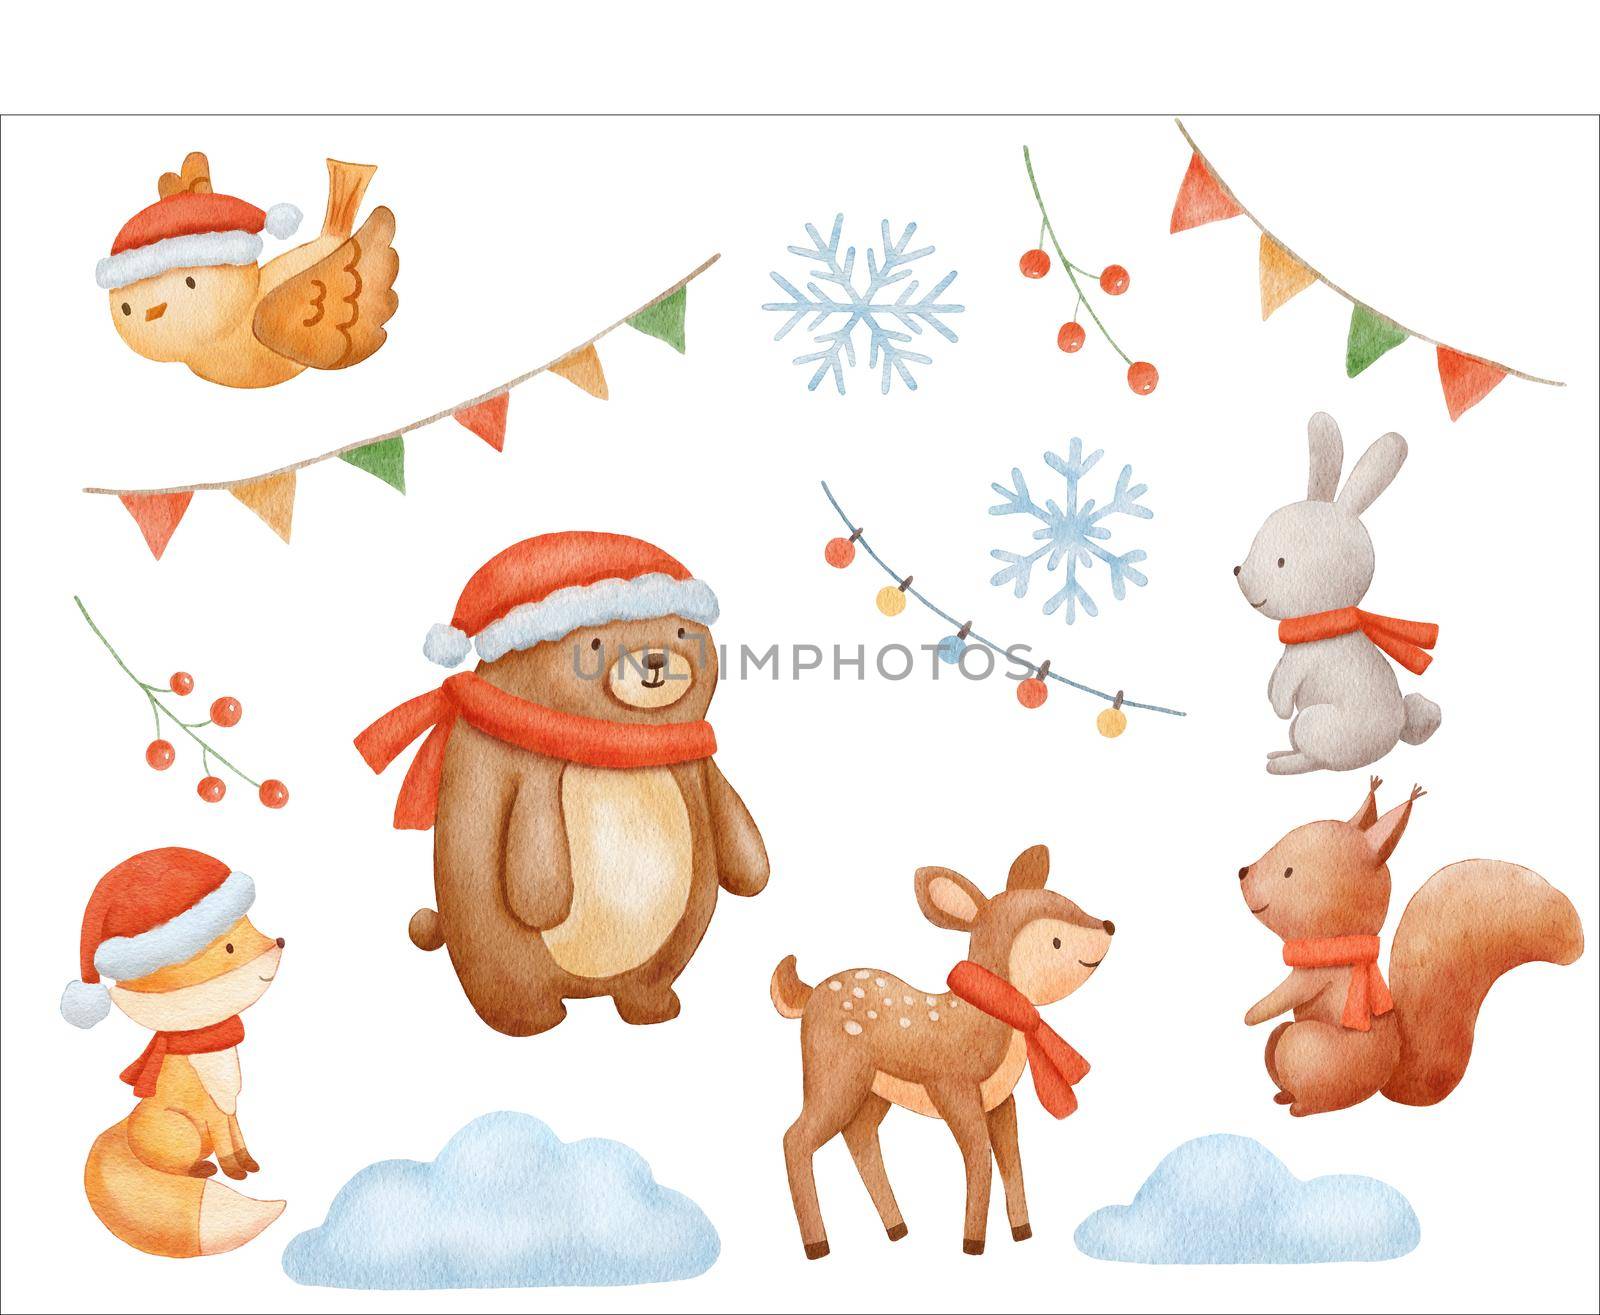 Watercolor Bear, deer, fox and bird characters with winter scarf and hat. Hand drawn cute woodland animal. Cartoon illustration isolated on white. by ElenaPlatova